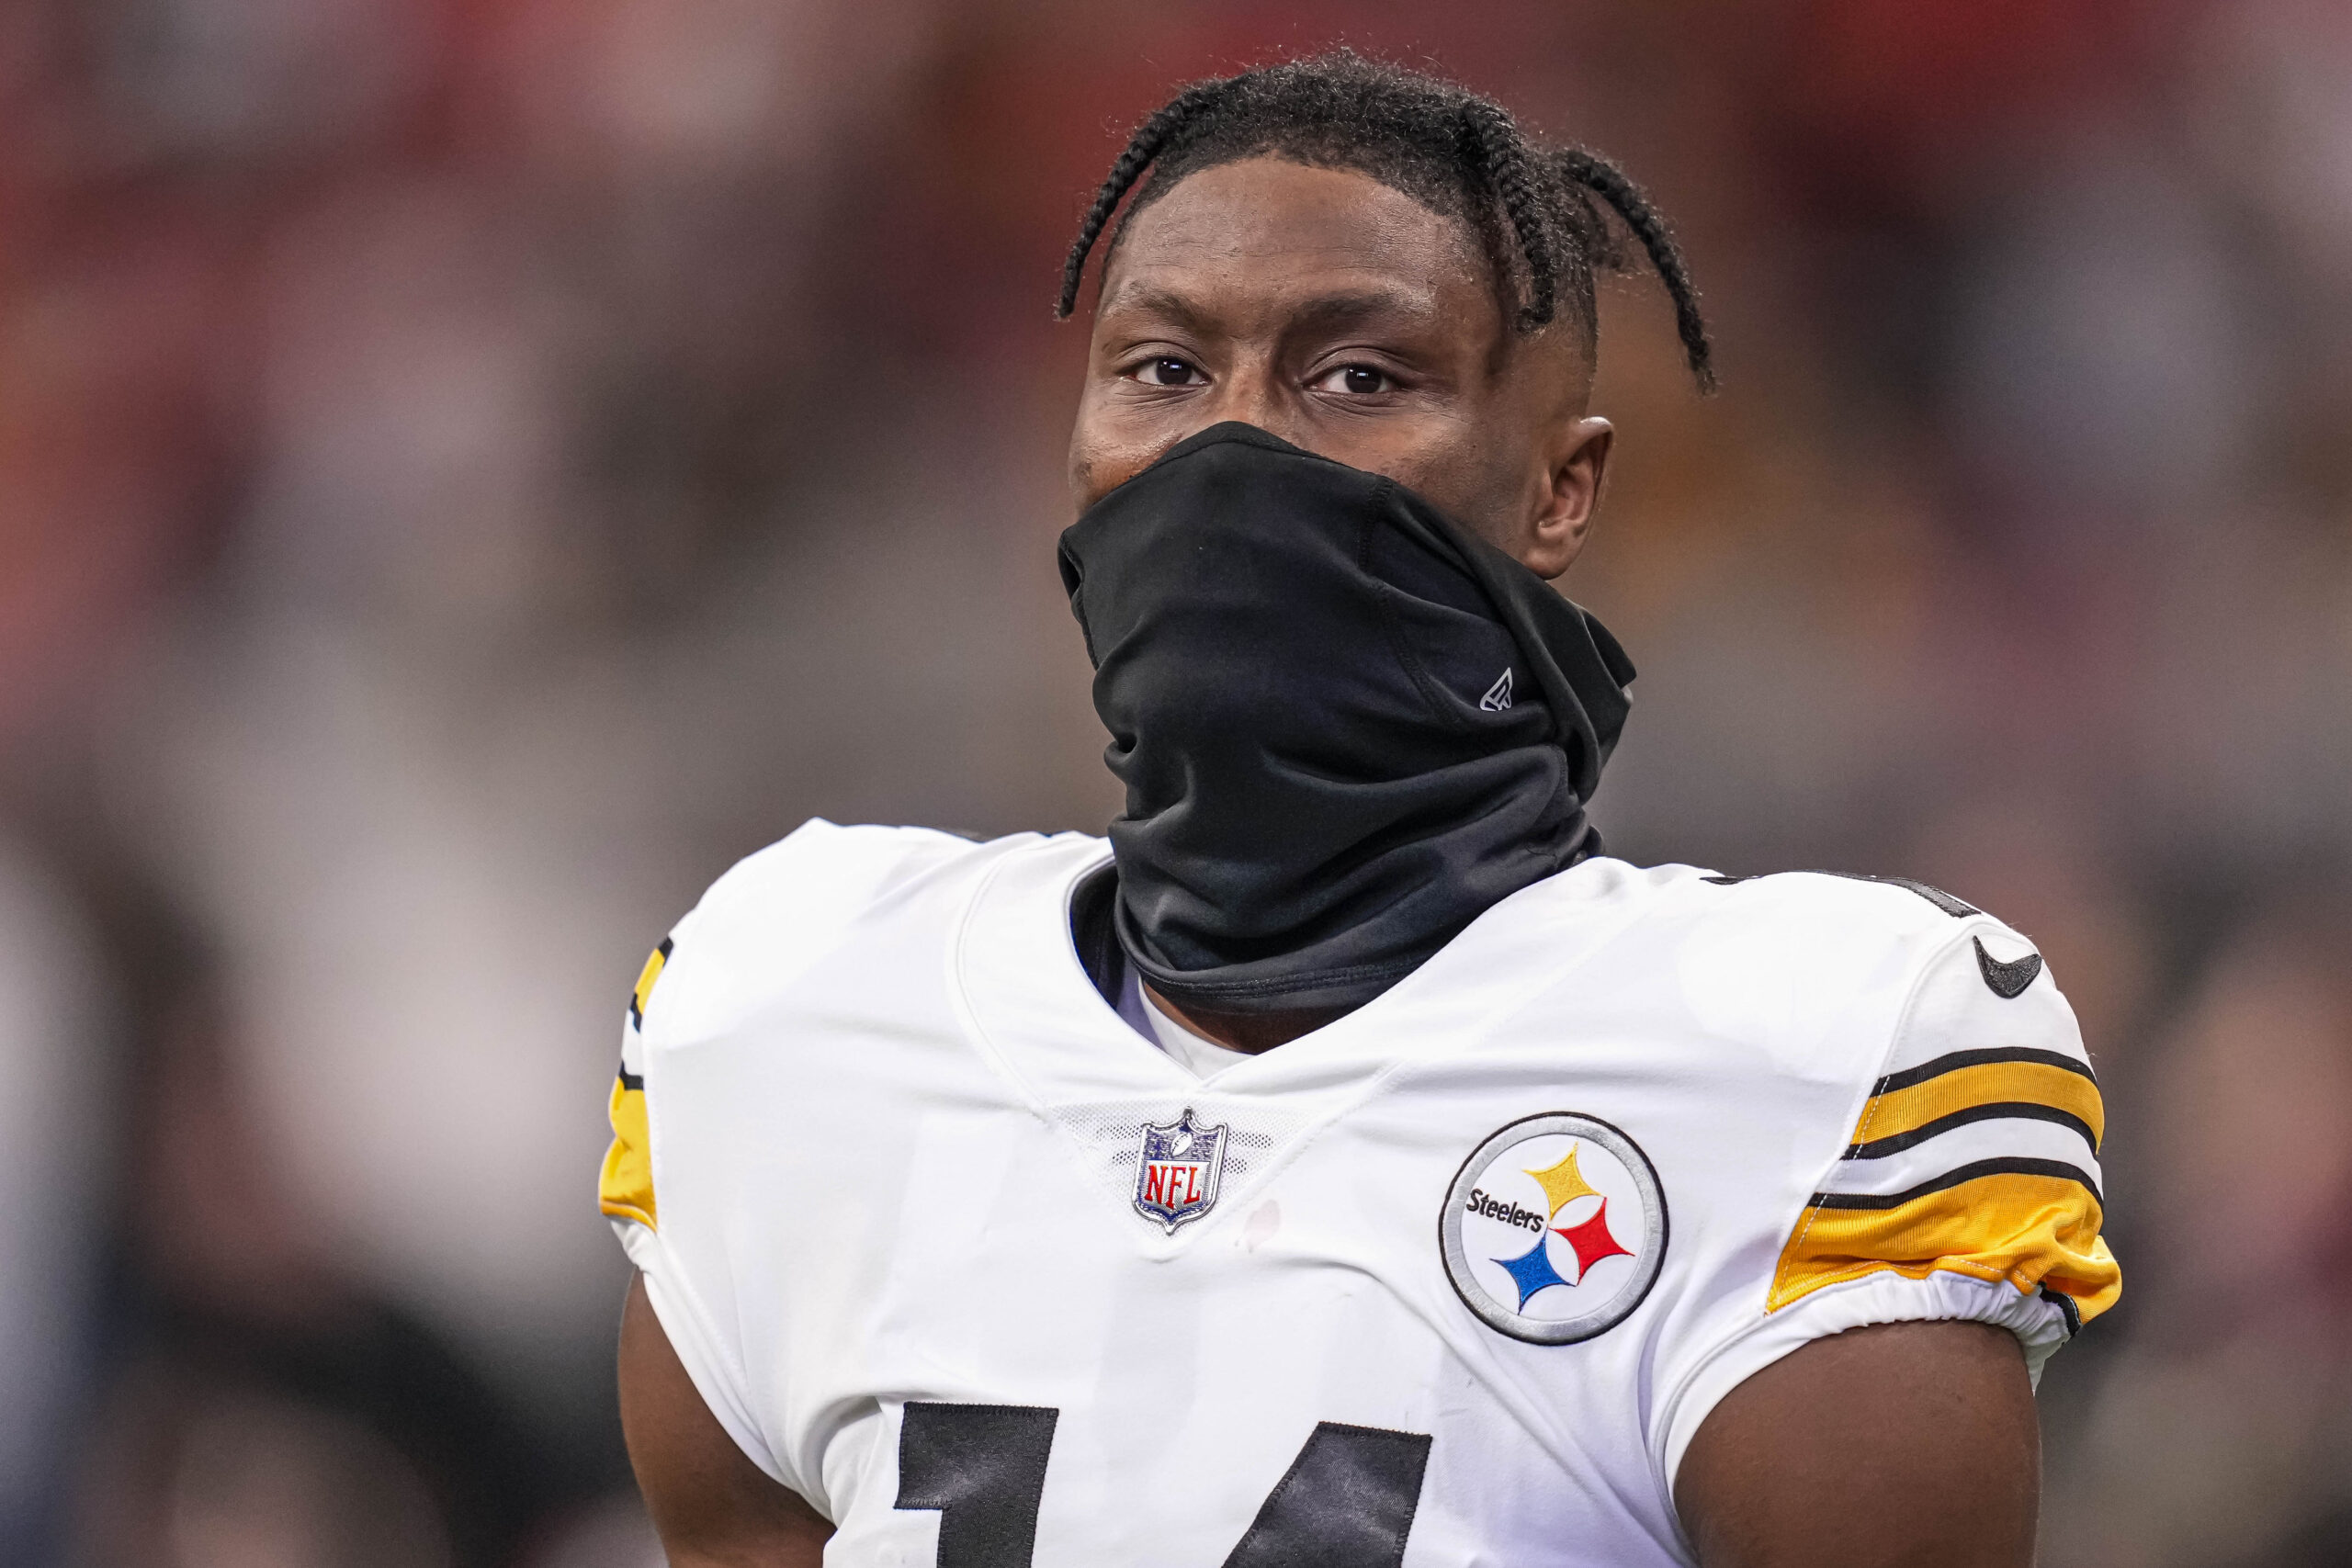 George Pickens: Fantasy Football Outlook For The 2023 Season